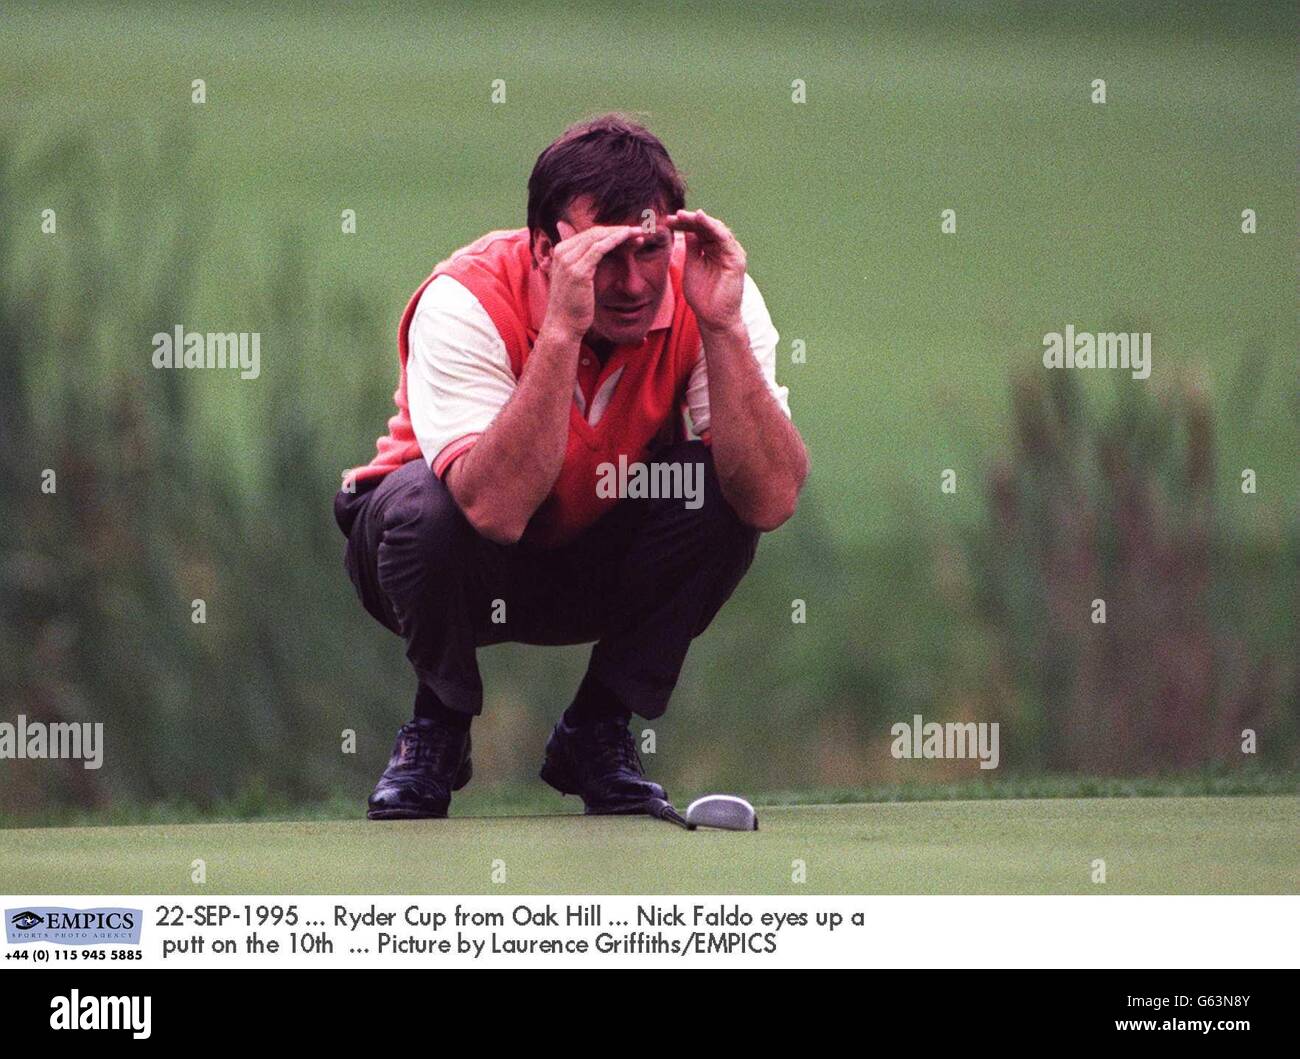 22-SEP-1995 ... Ryder Cup from Oak Hill ... Nick Faldo eyes up a putt on the 10th ... Picture by Laurence Griffiths/EMPICS Stock Photo